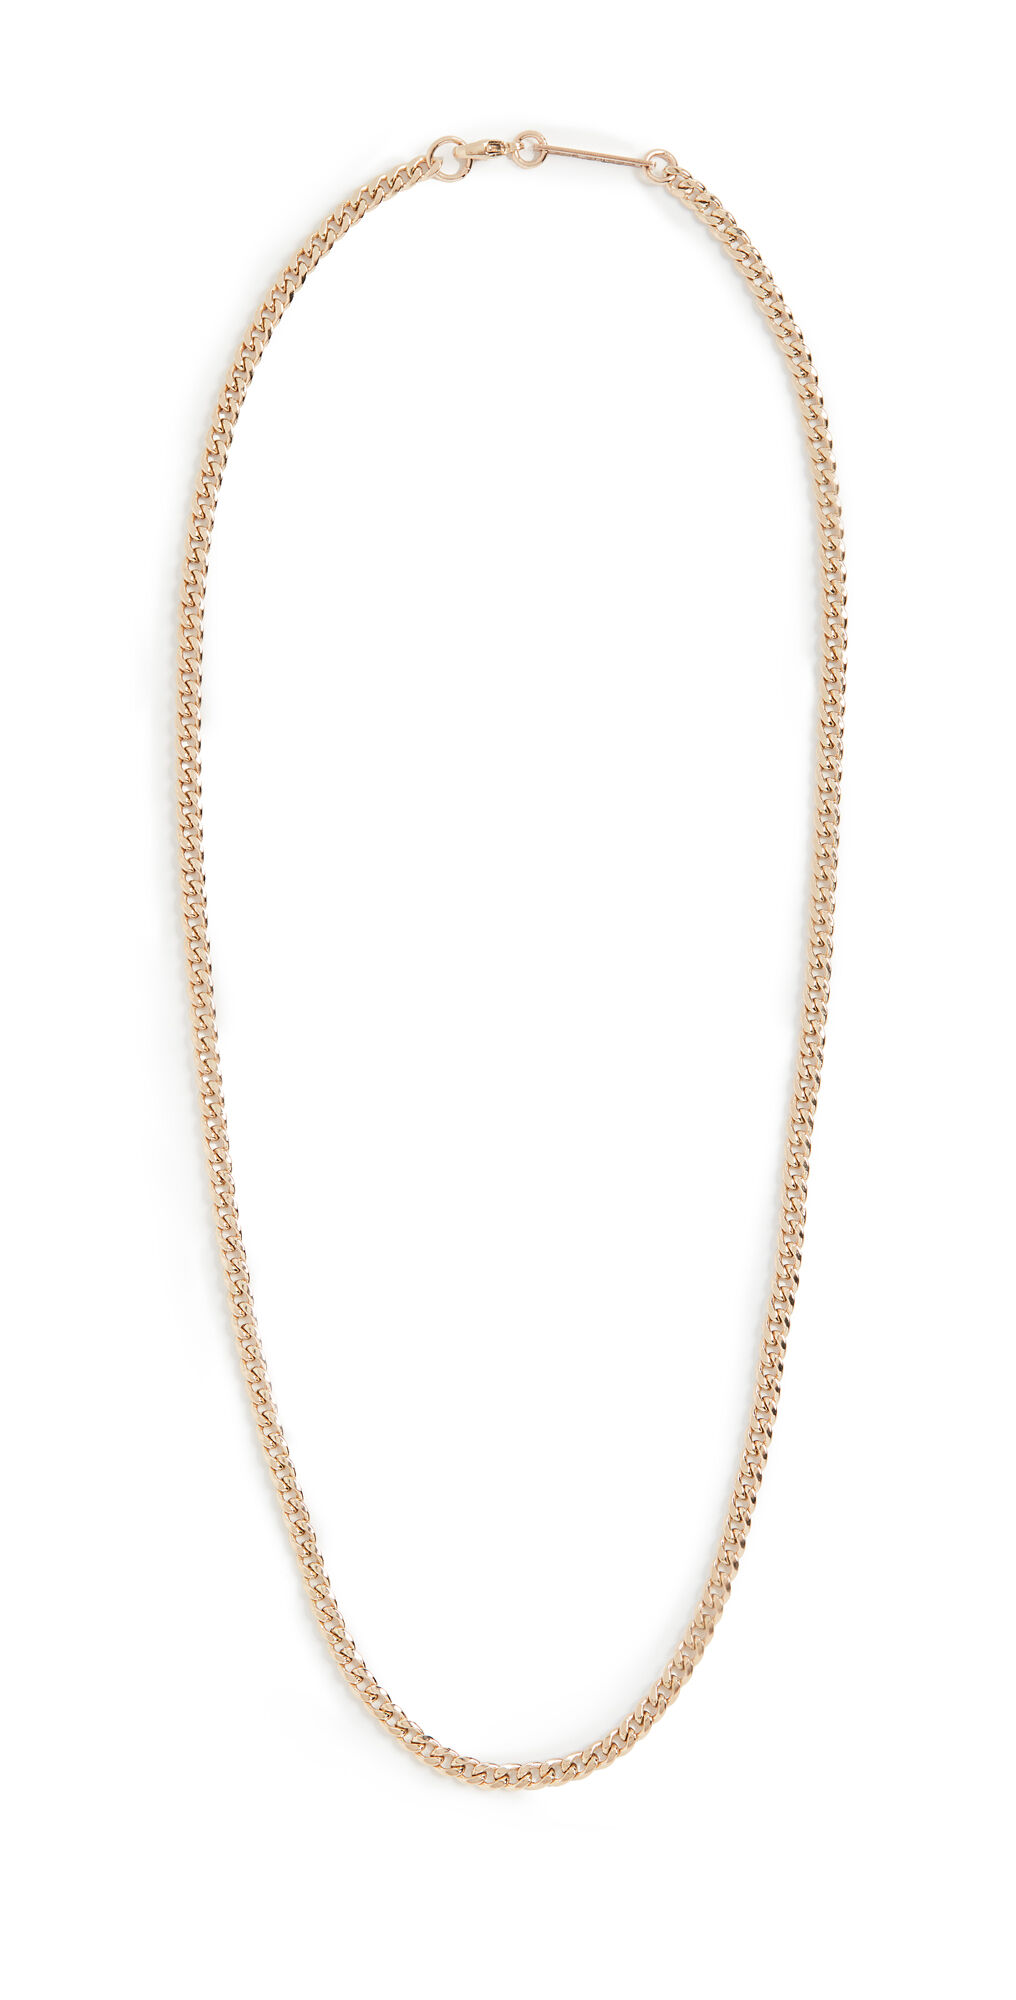 Chicco Zoe Chicco 14k Gold Small Hollow Curb Chain Necklace Yellow Gold One Size  Yellow Gold  size:One Size